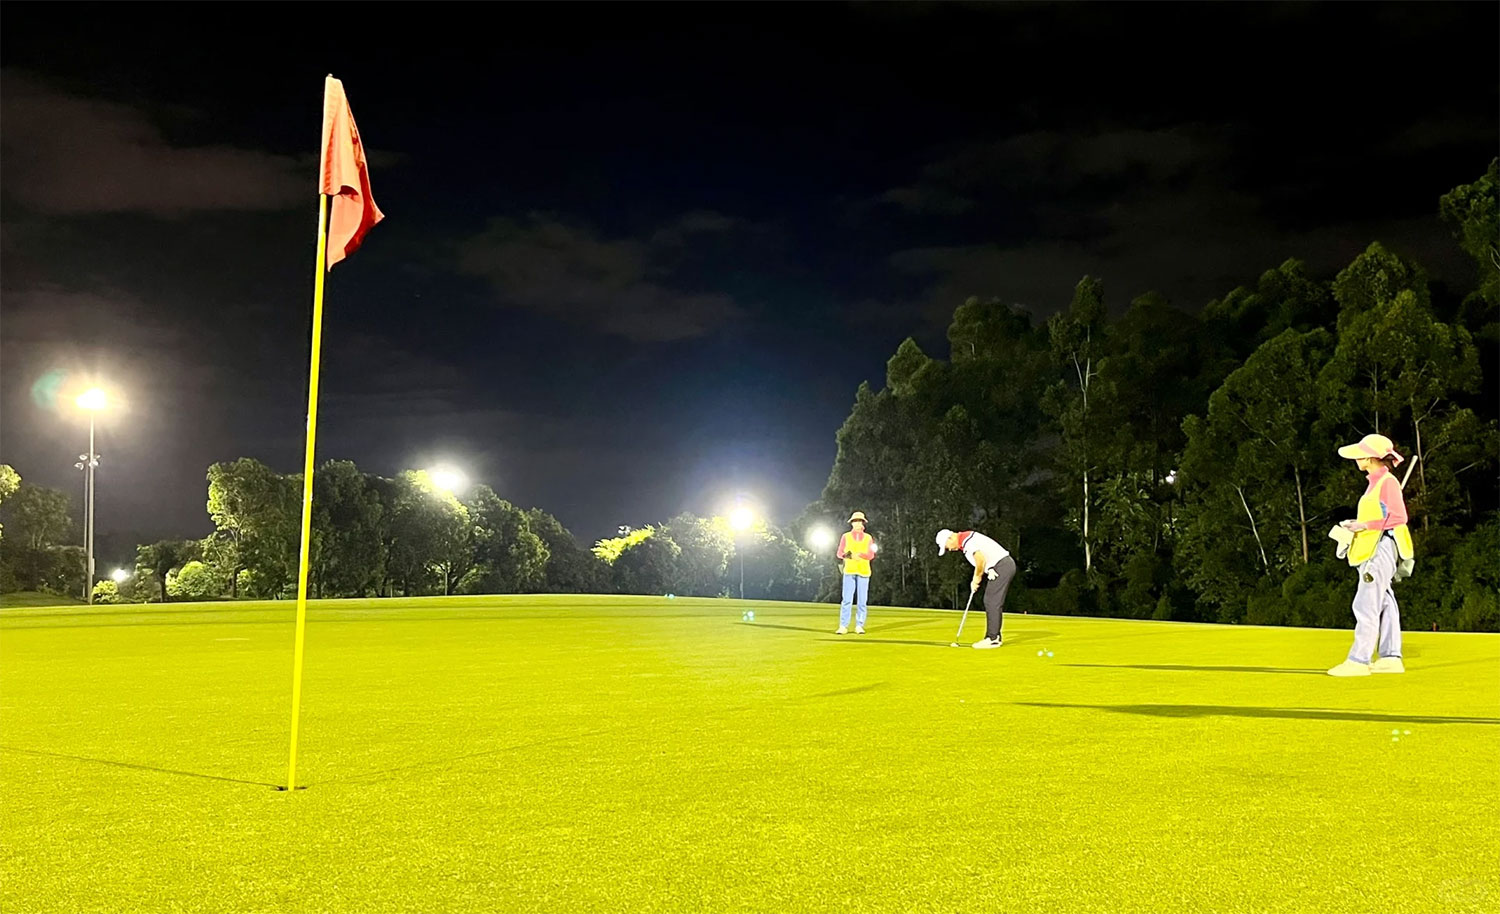 Golf Course and Driving Range Lighting Requirements